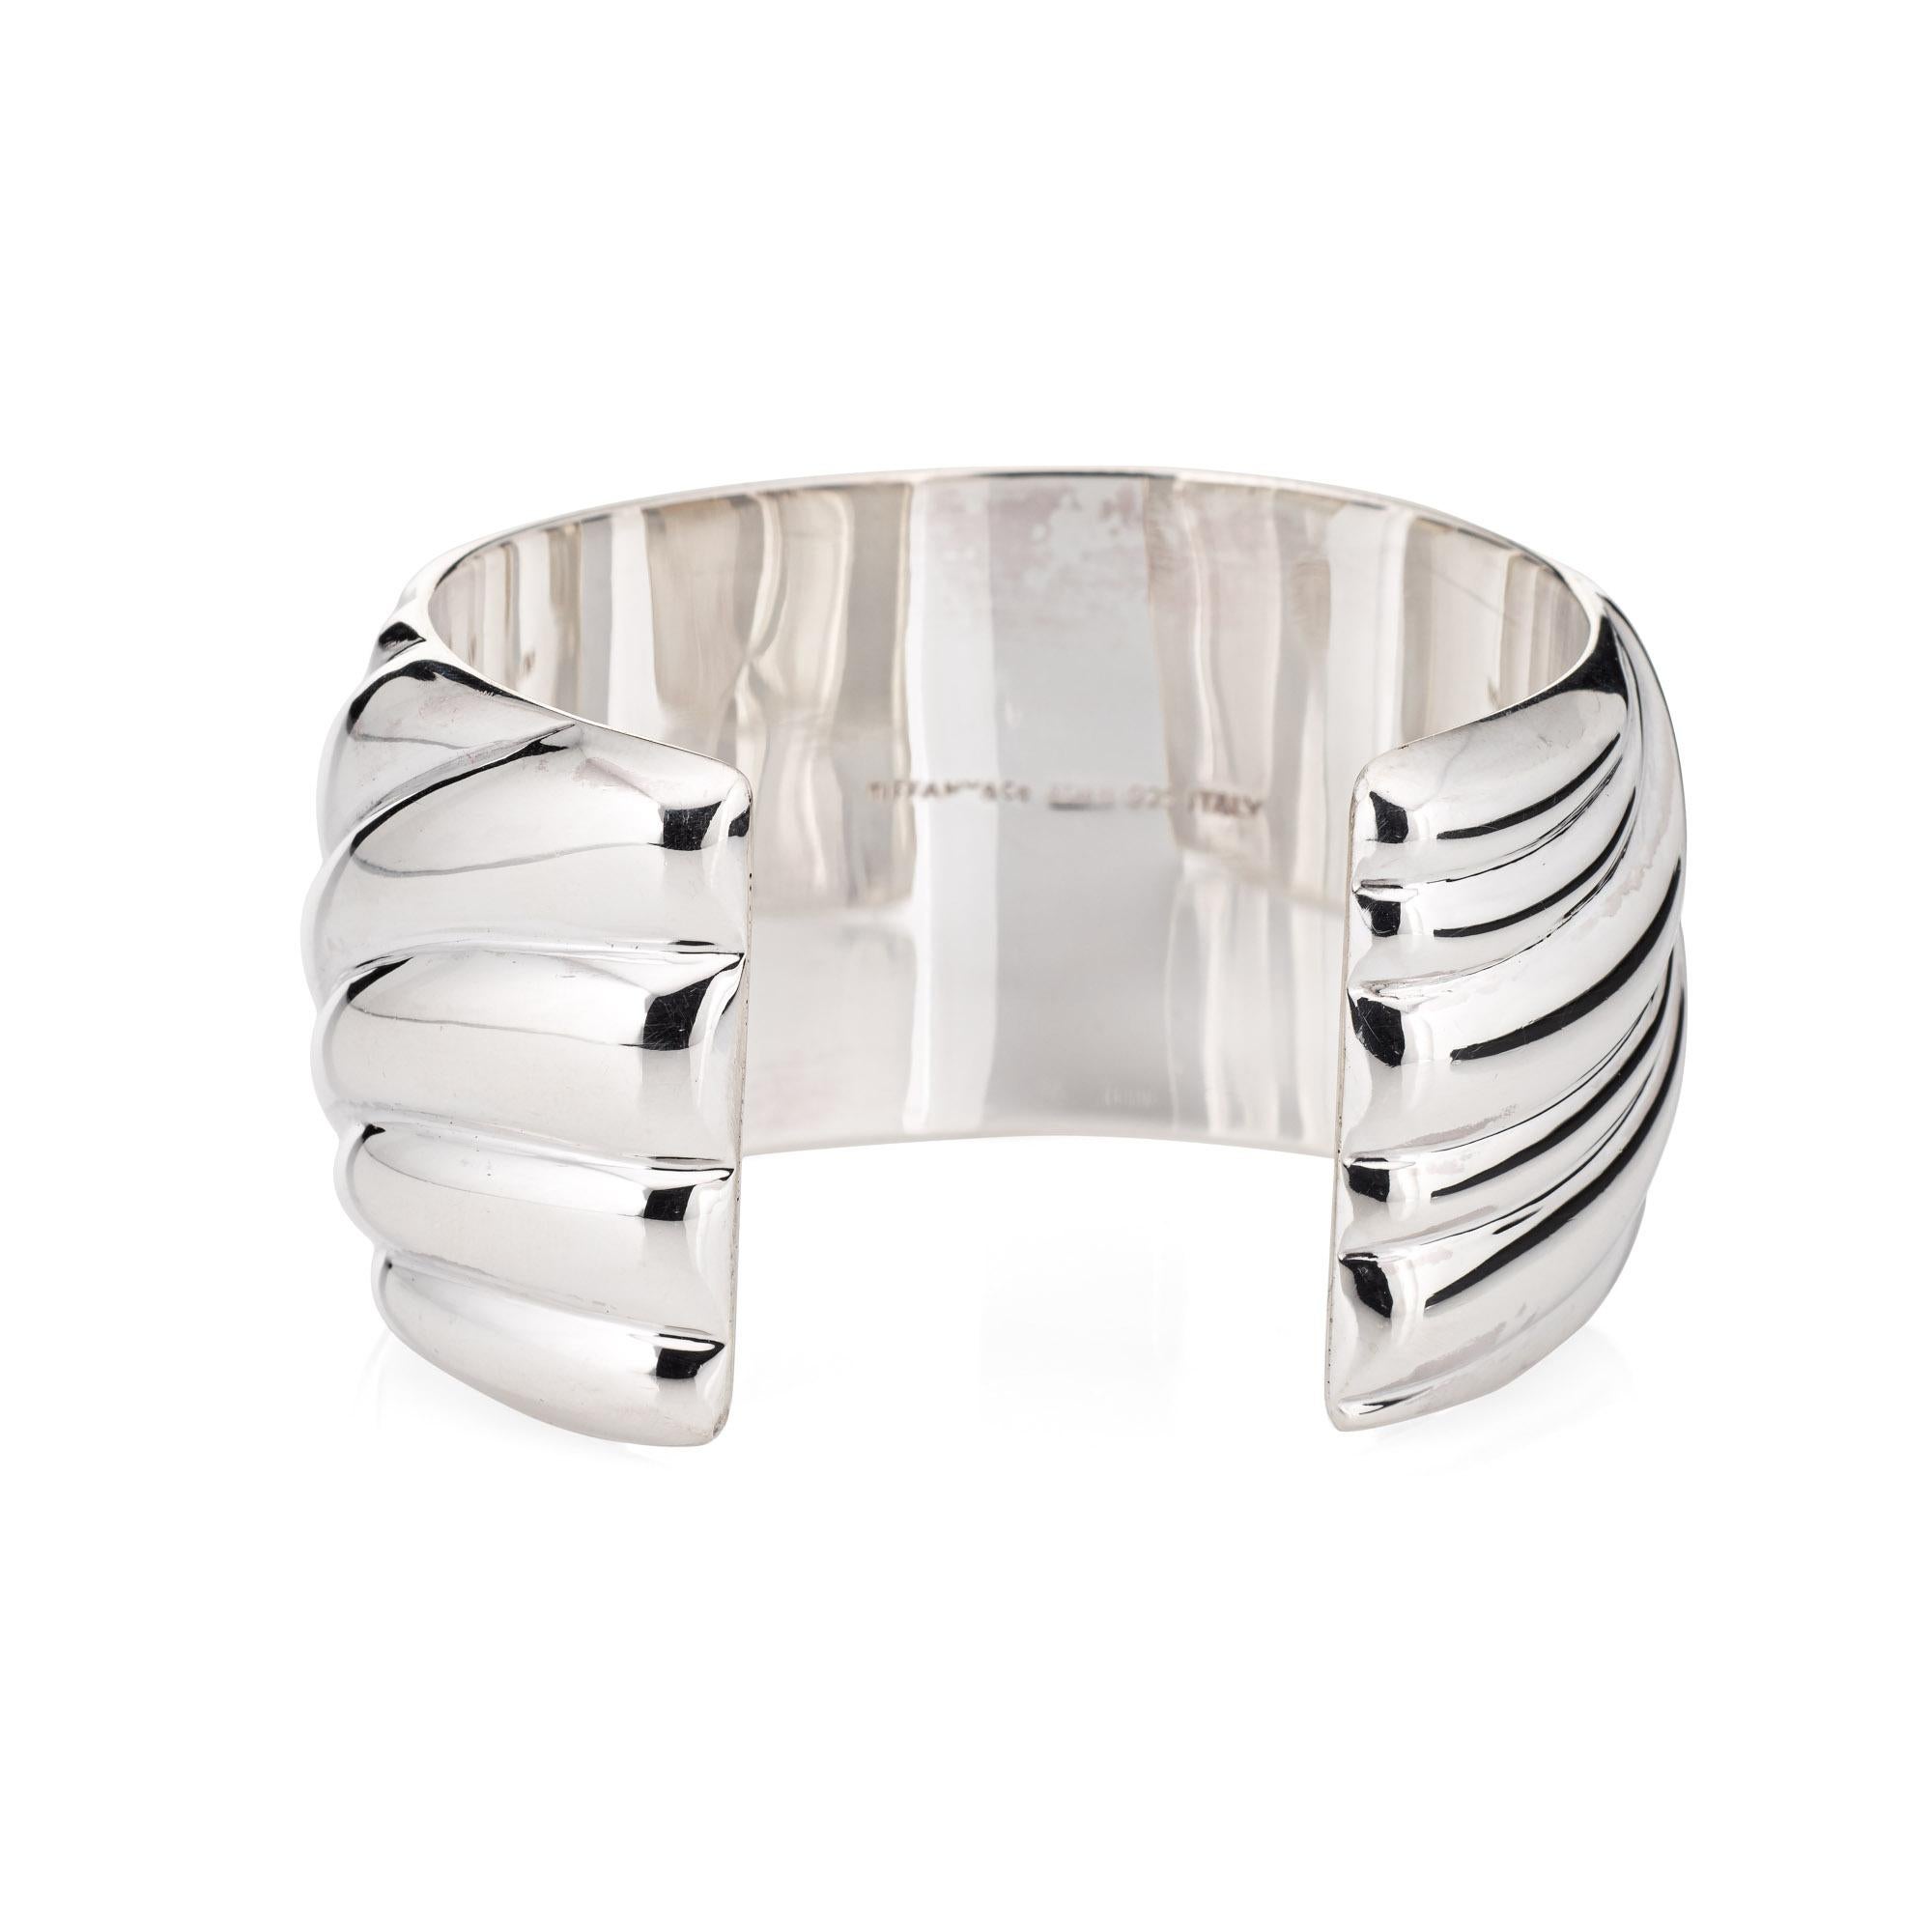 Stylish and finely detailed vintage Tiffany & Co cuff bracelet, crafted in sterling silver.  

The sculpted cuff bracelet is wide (34mm - 1.33 inches) and makes a great statement on the wrist. The bracelet is designed to fit a small wrist (6 inches)